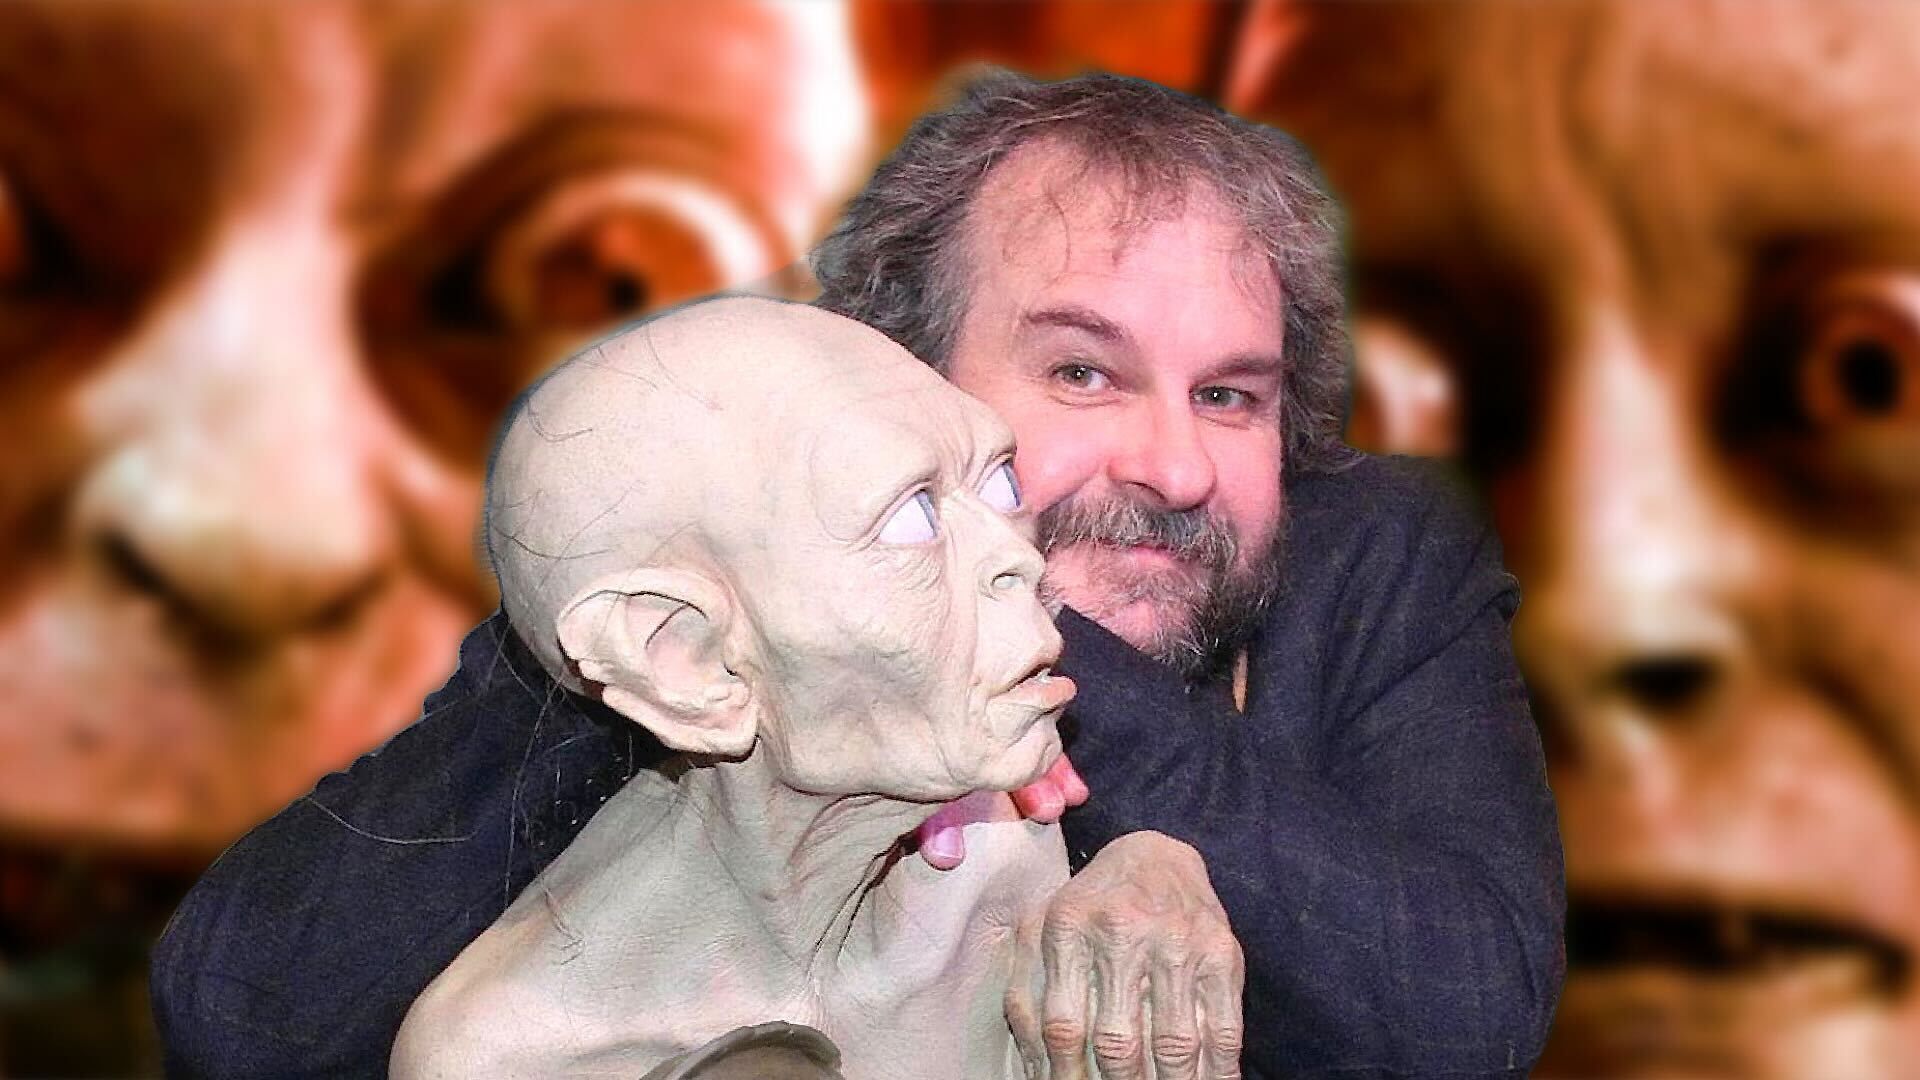 Peter Jackson with Gollum from Lord of the Rings